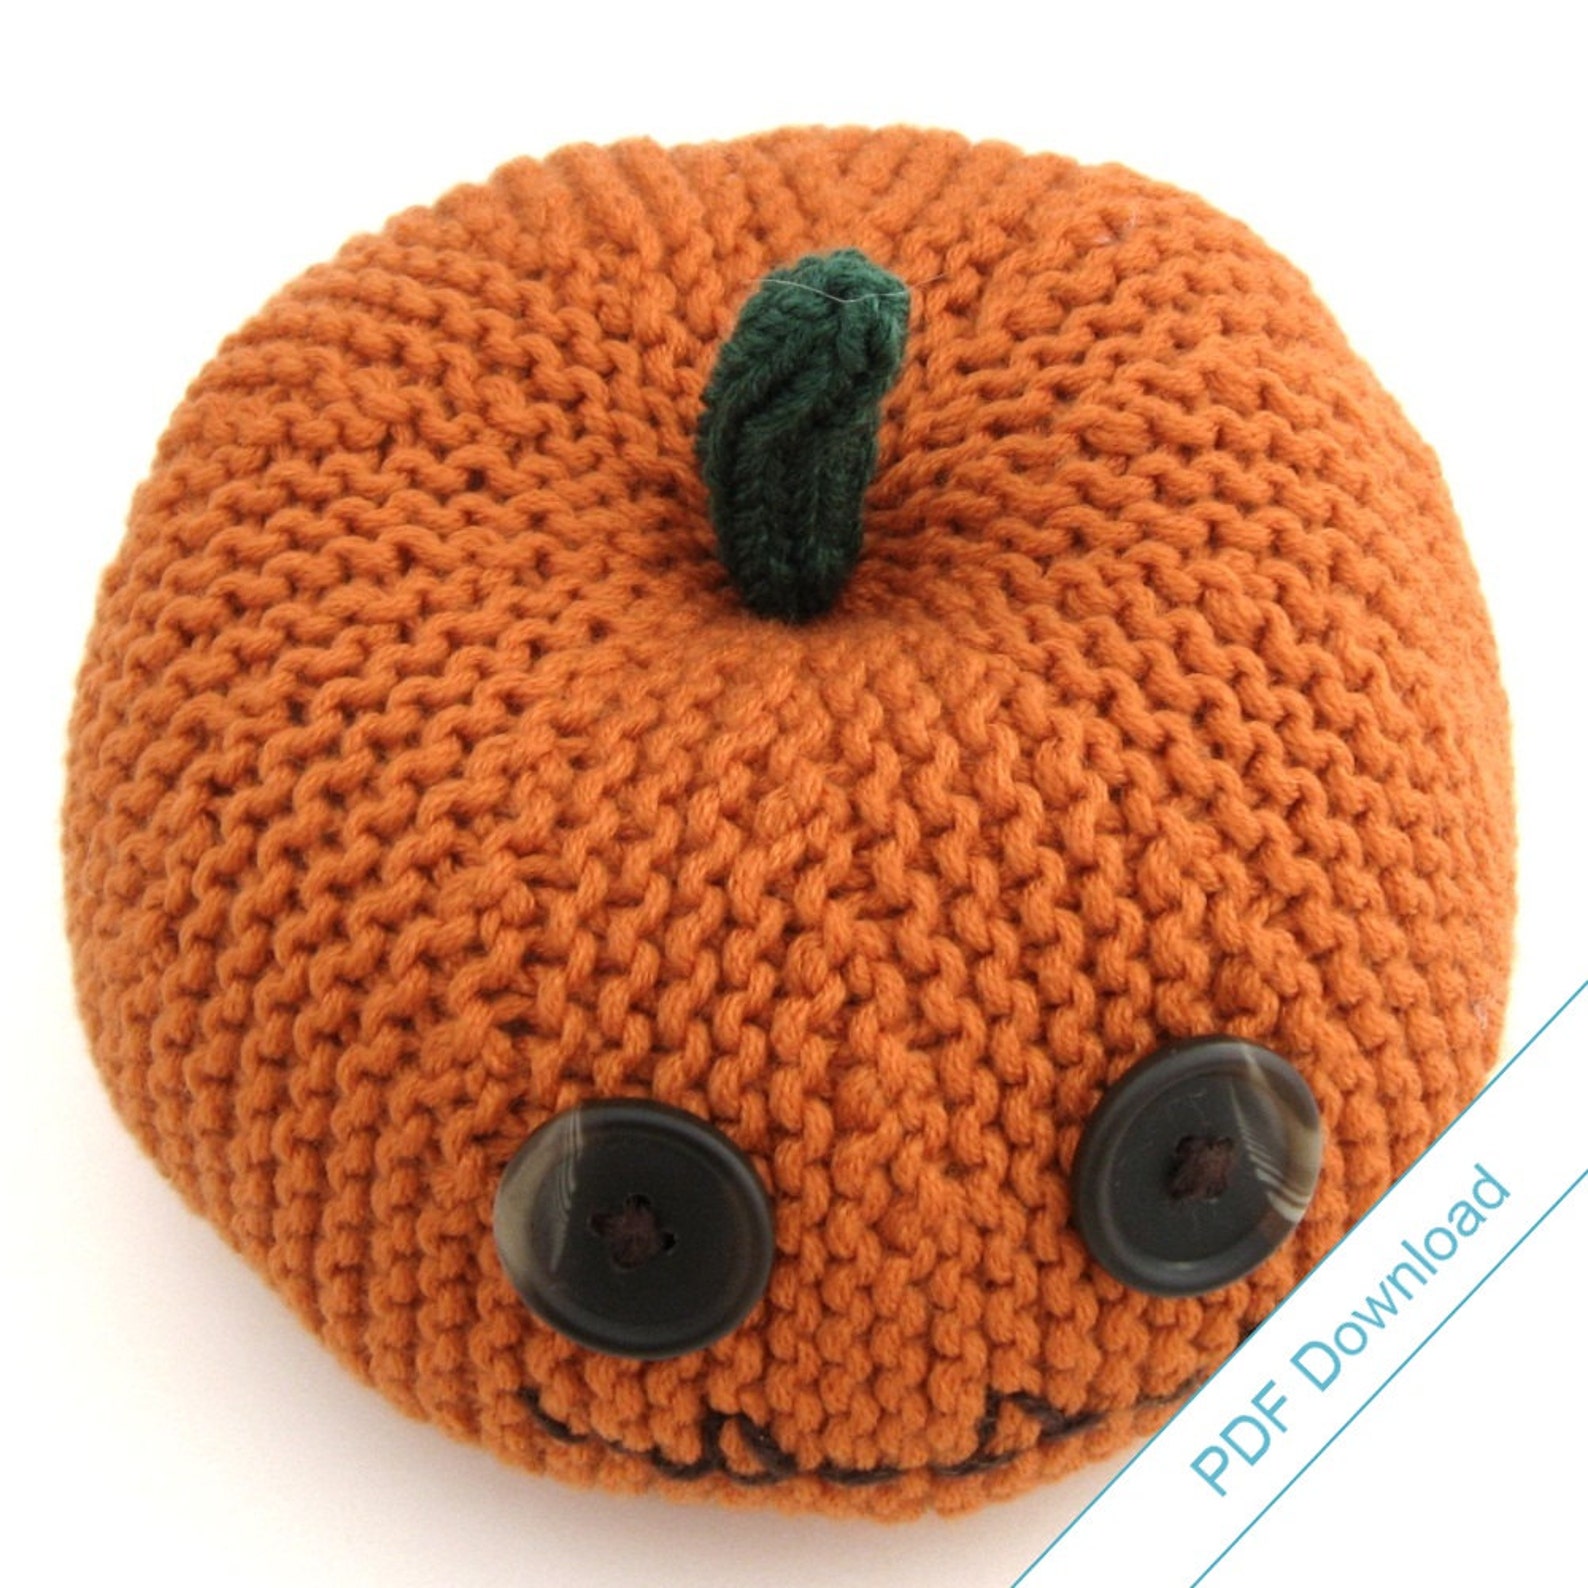 Pumpkin Head Knitting Pattern large. Knit Your Own - Etsy